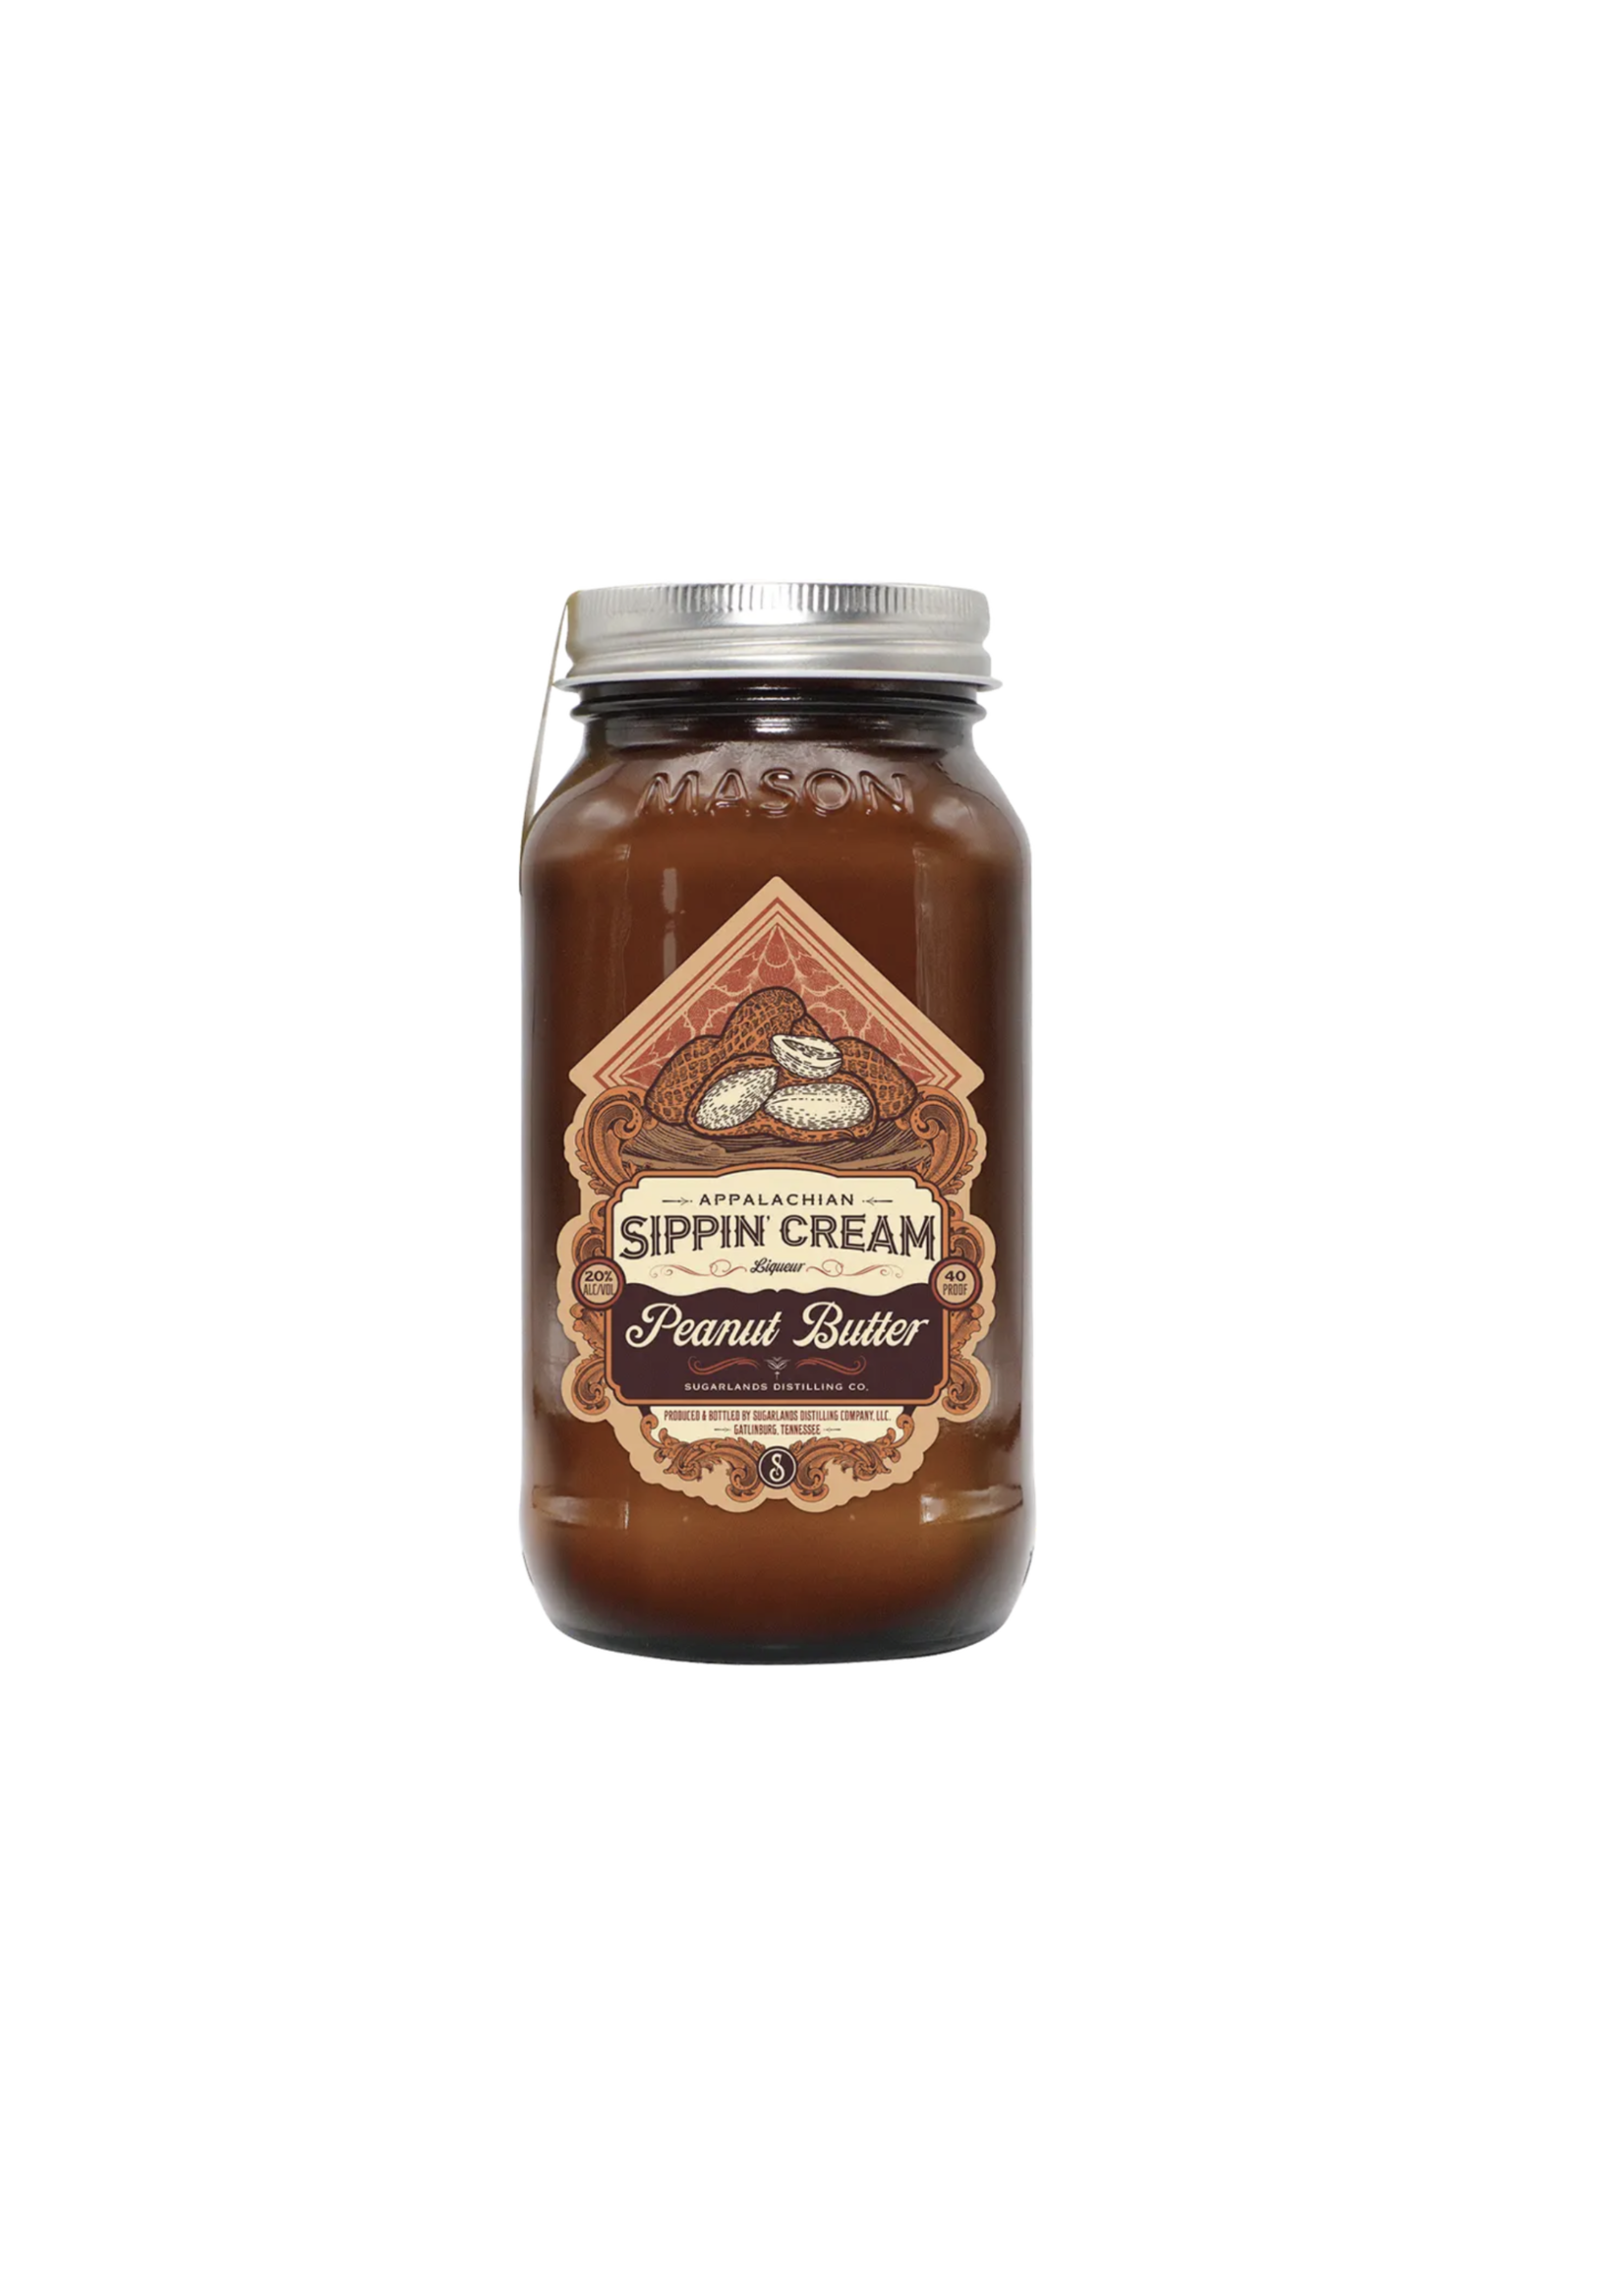 Sugarlands Moonshine & Sippin Cream Sugarlands Peanut Butter Sippin Cream 40Proof Jar 750ml